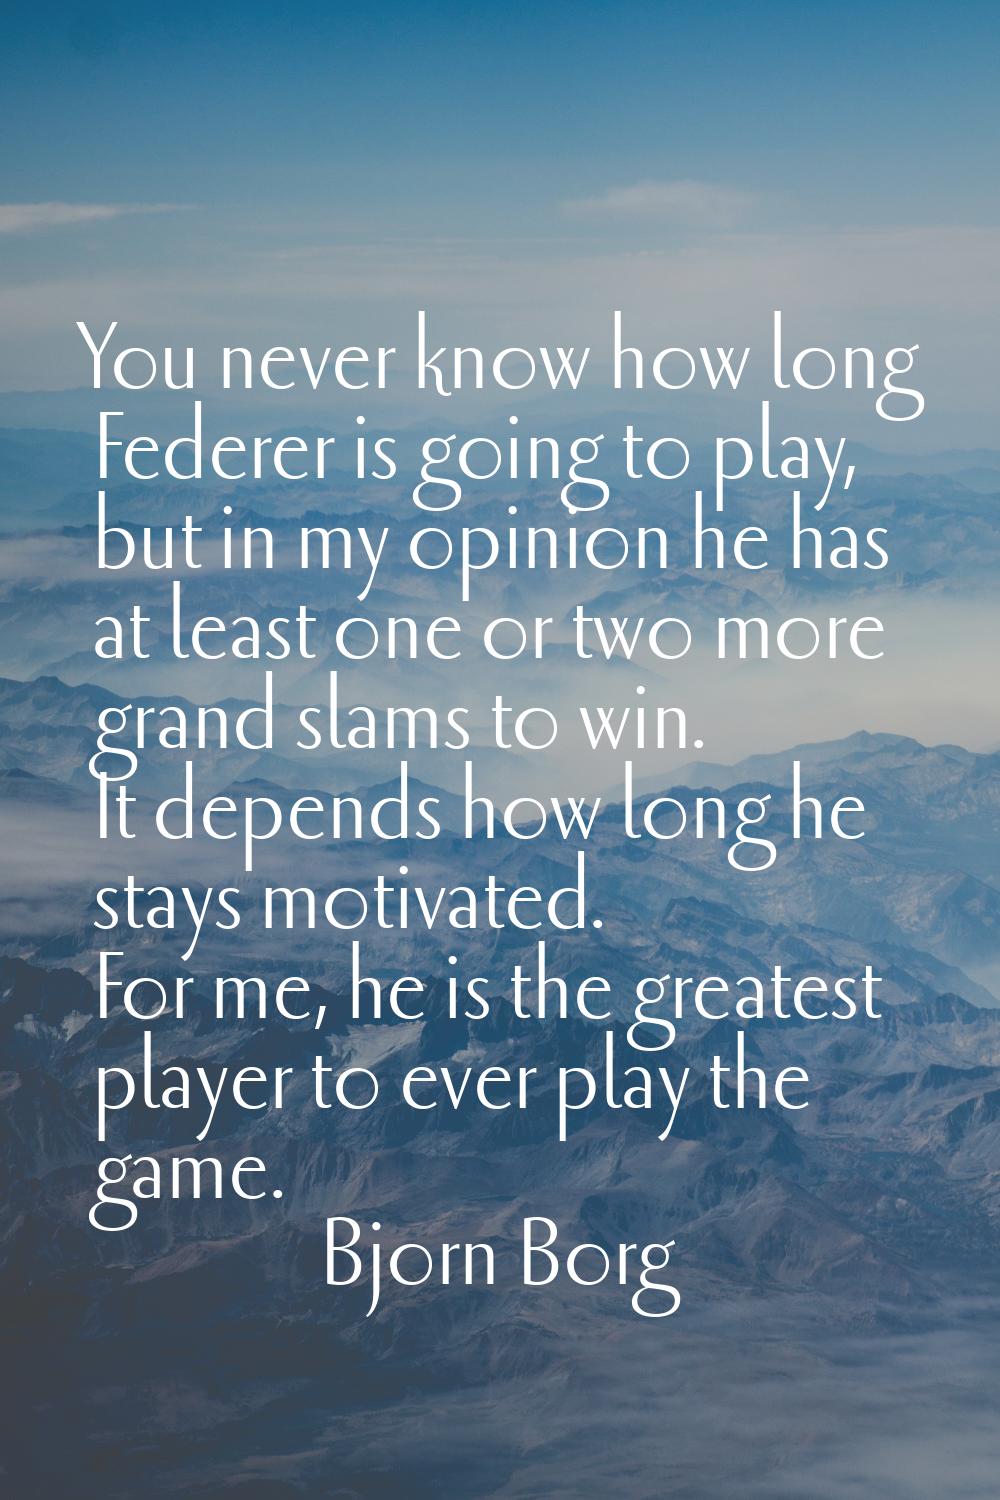 You never know how long Federer is going to play, but in my opinion he has at least one or two more